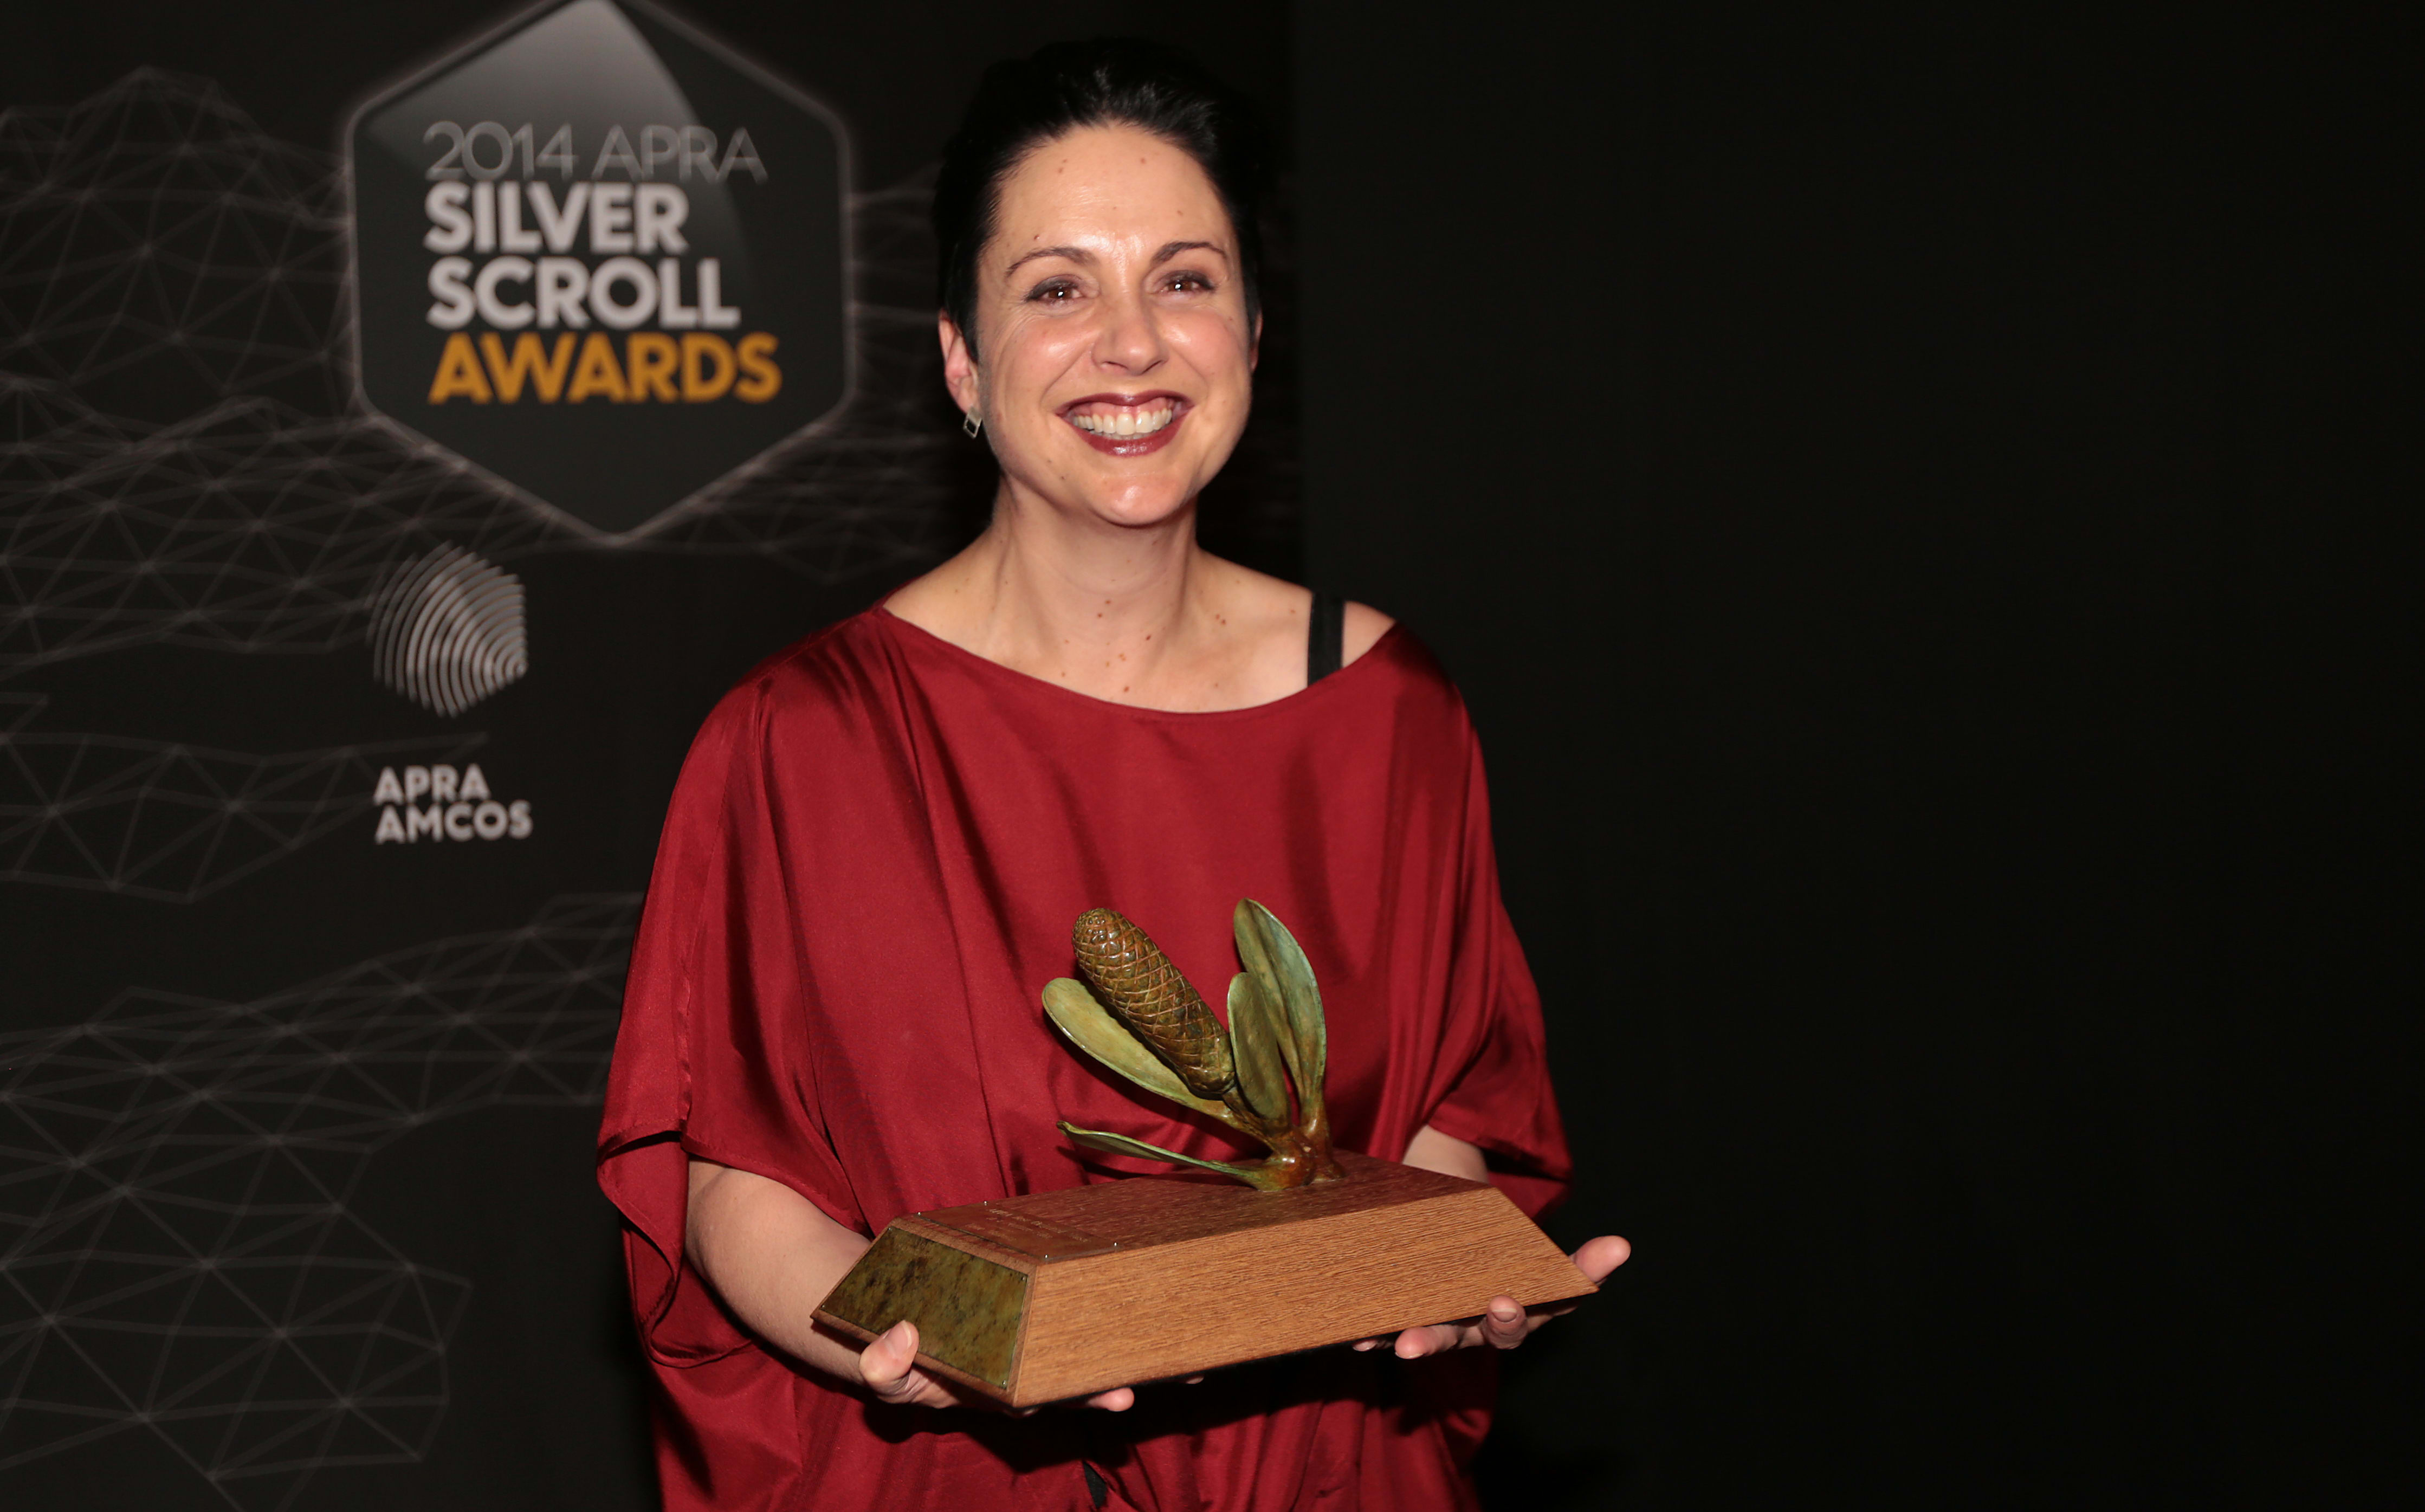 Victoria Kelly poses with her award at the Silver Scrolls Photo RNZ Diego Opatowski